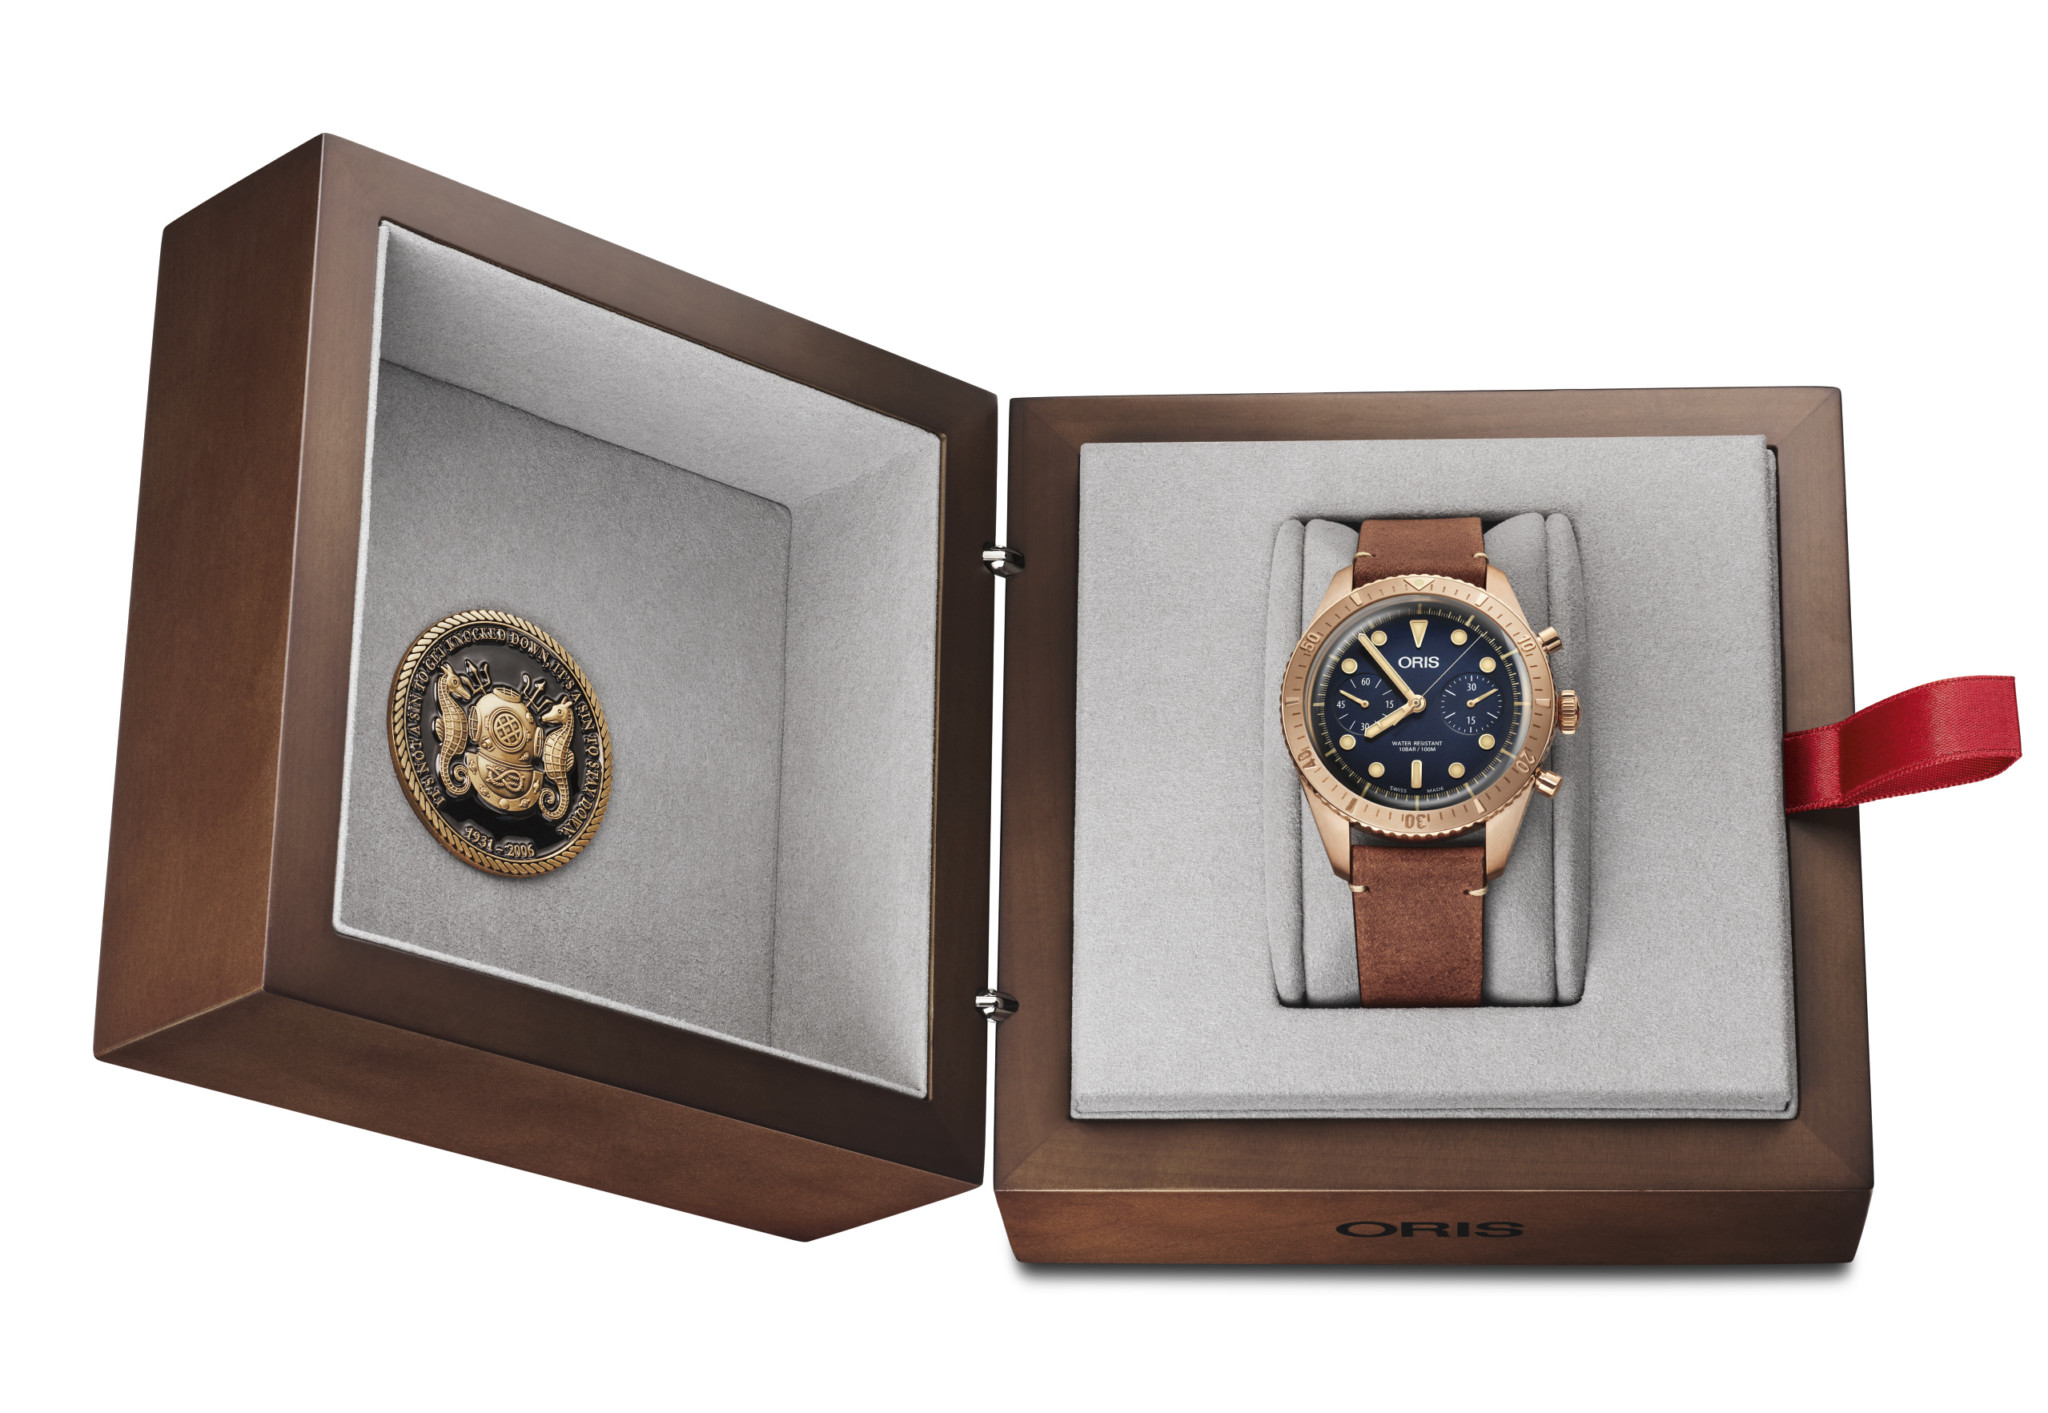 The watch comes in a wooden presentation box, complete with a coin issued by the carl brashear foundation